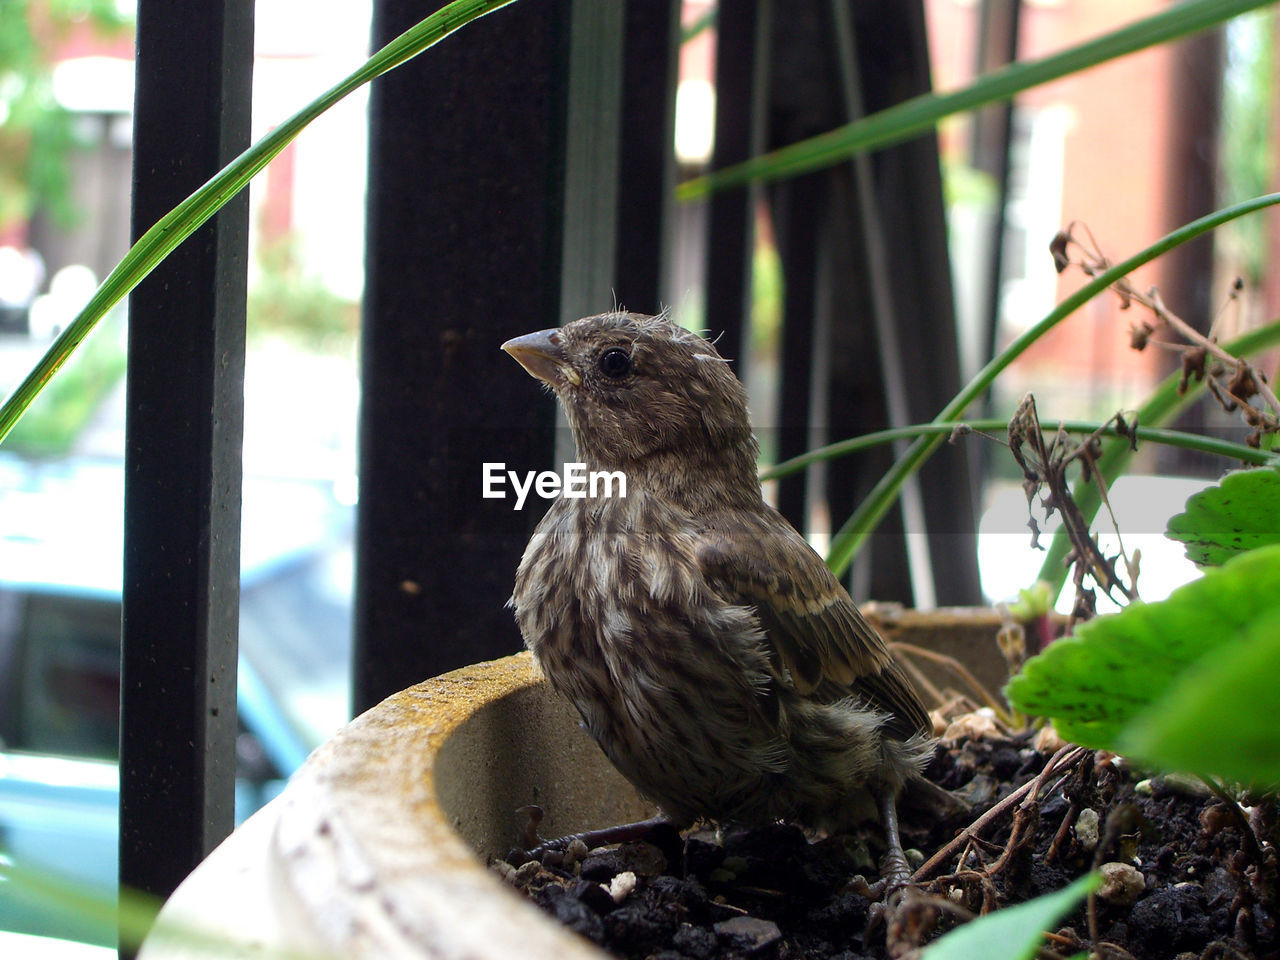 Sparrow perching in potted plant